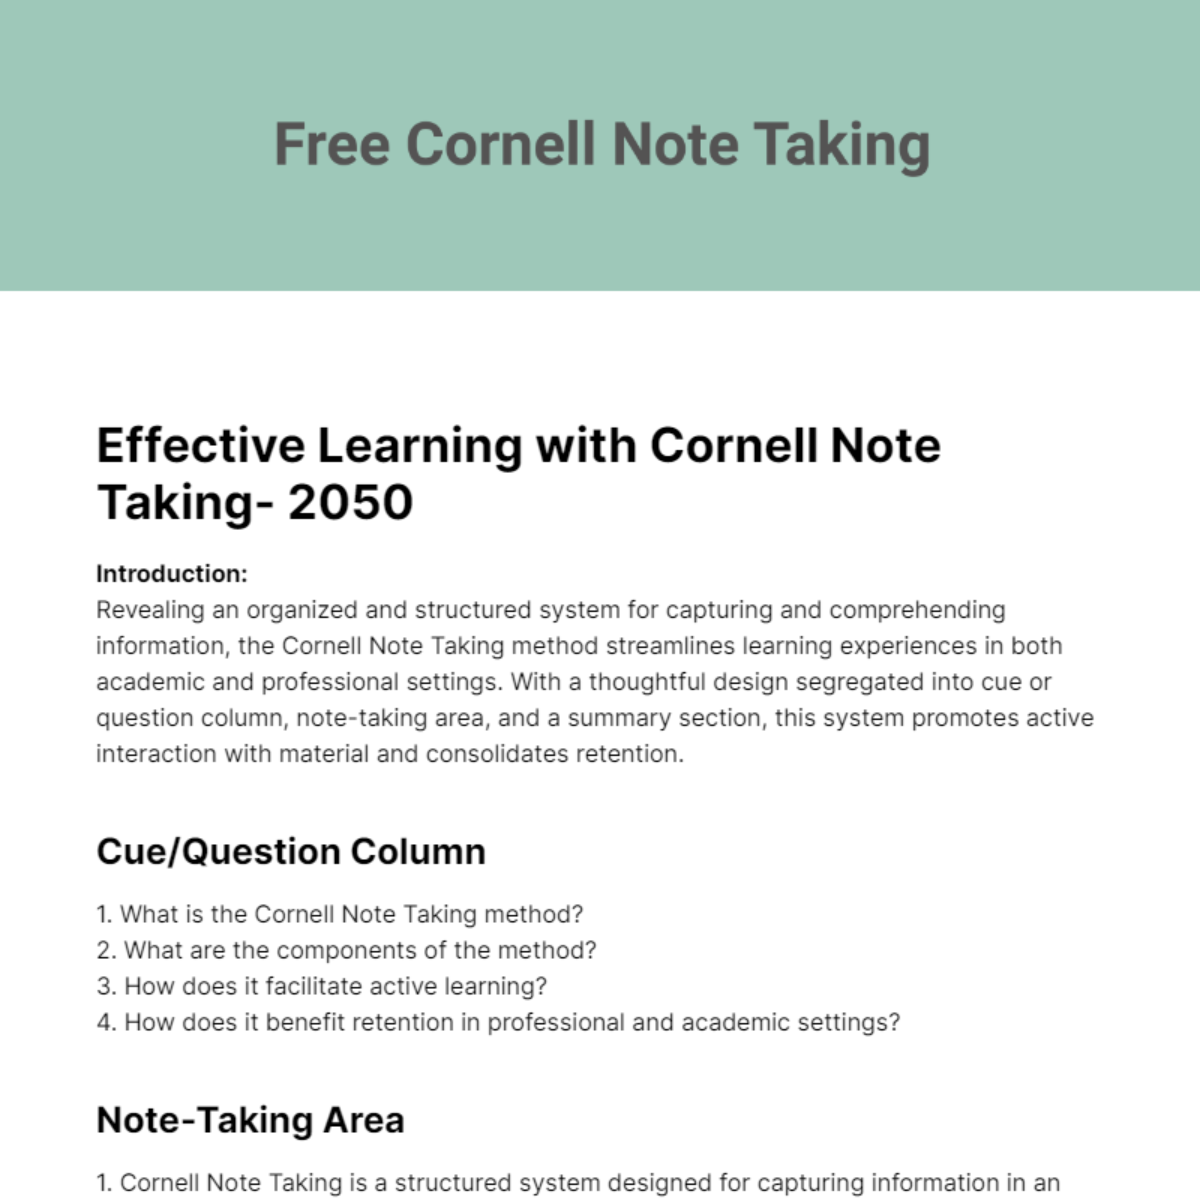 Cornell Note Taking Template